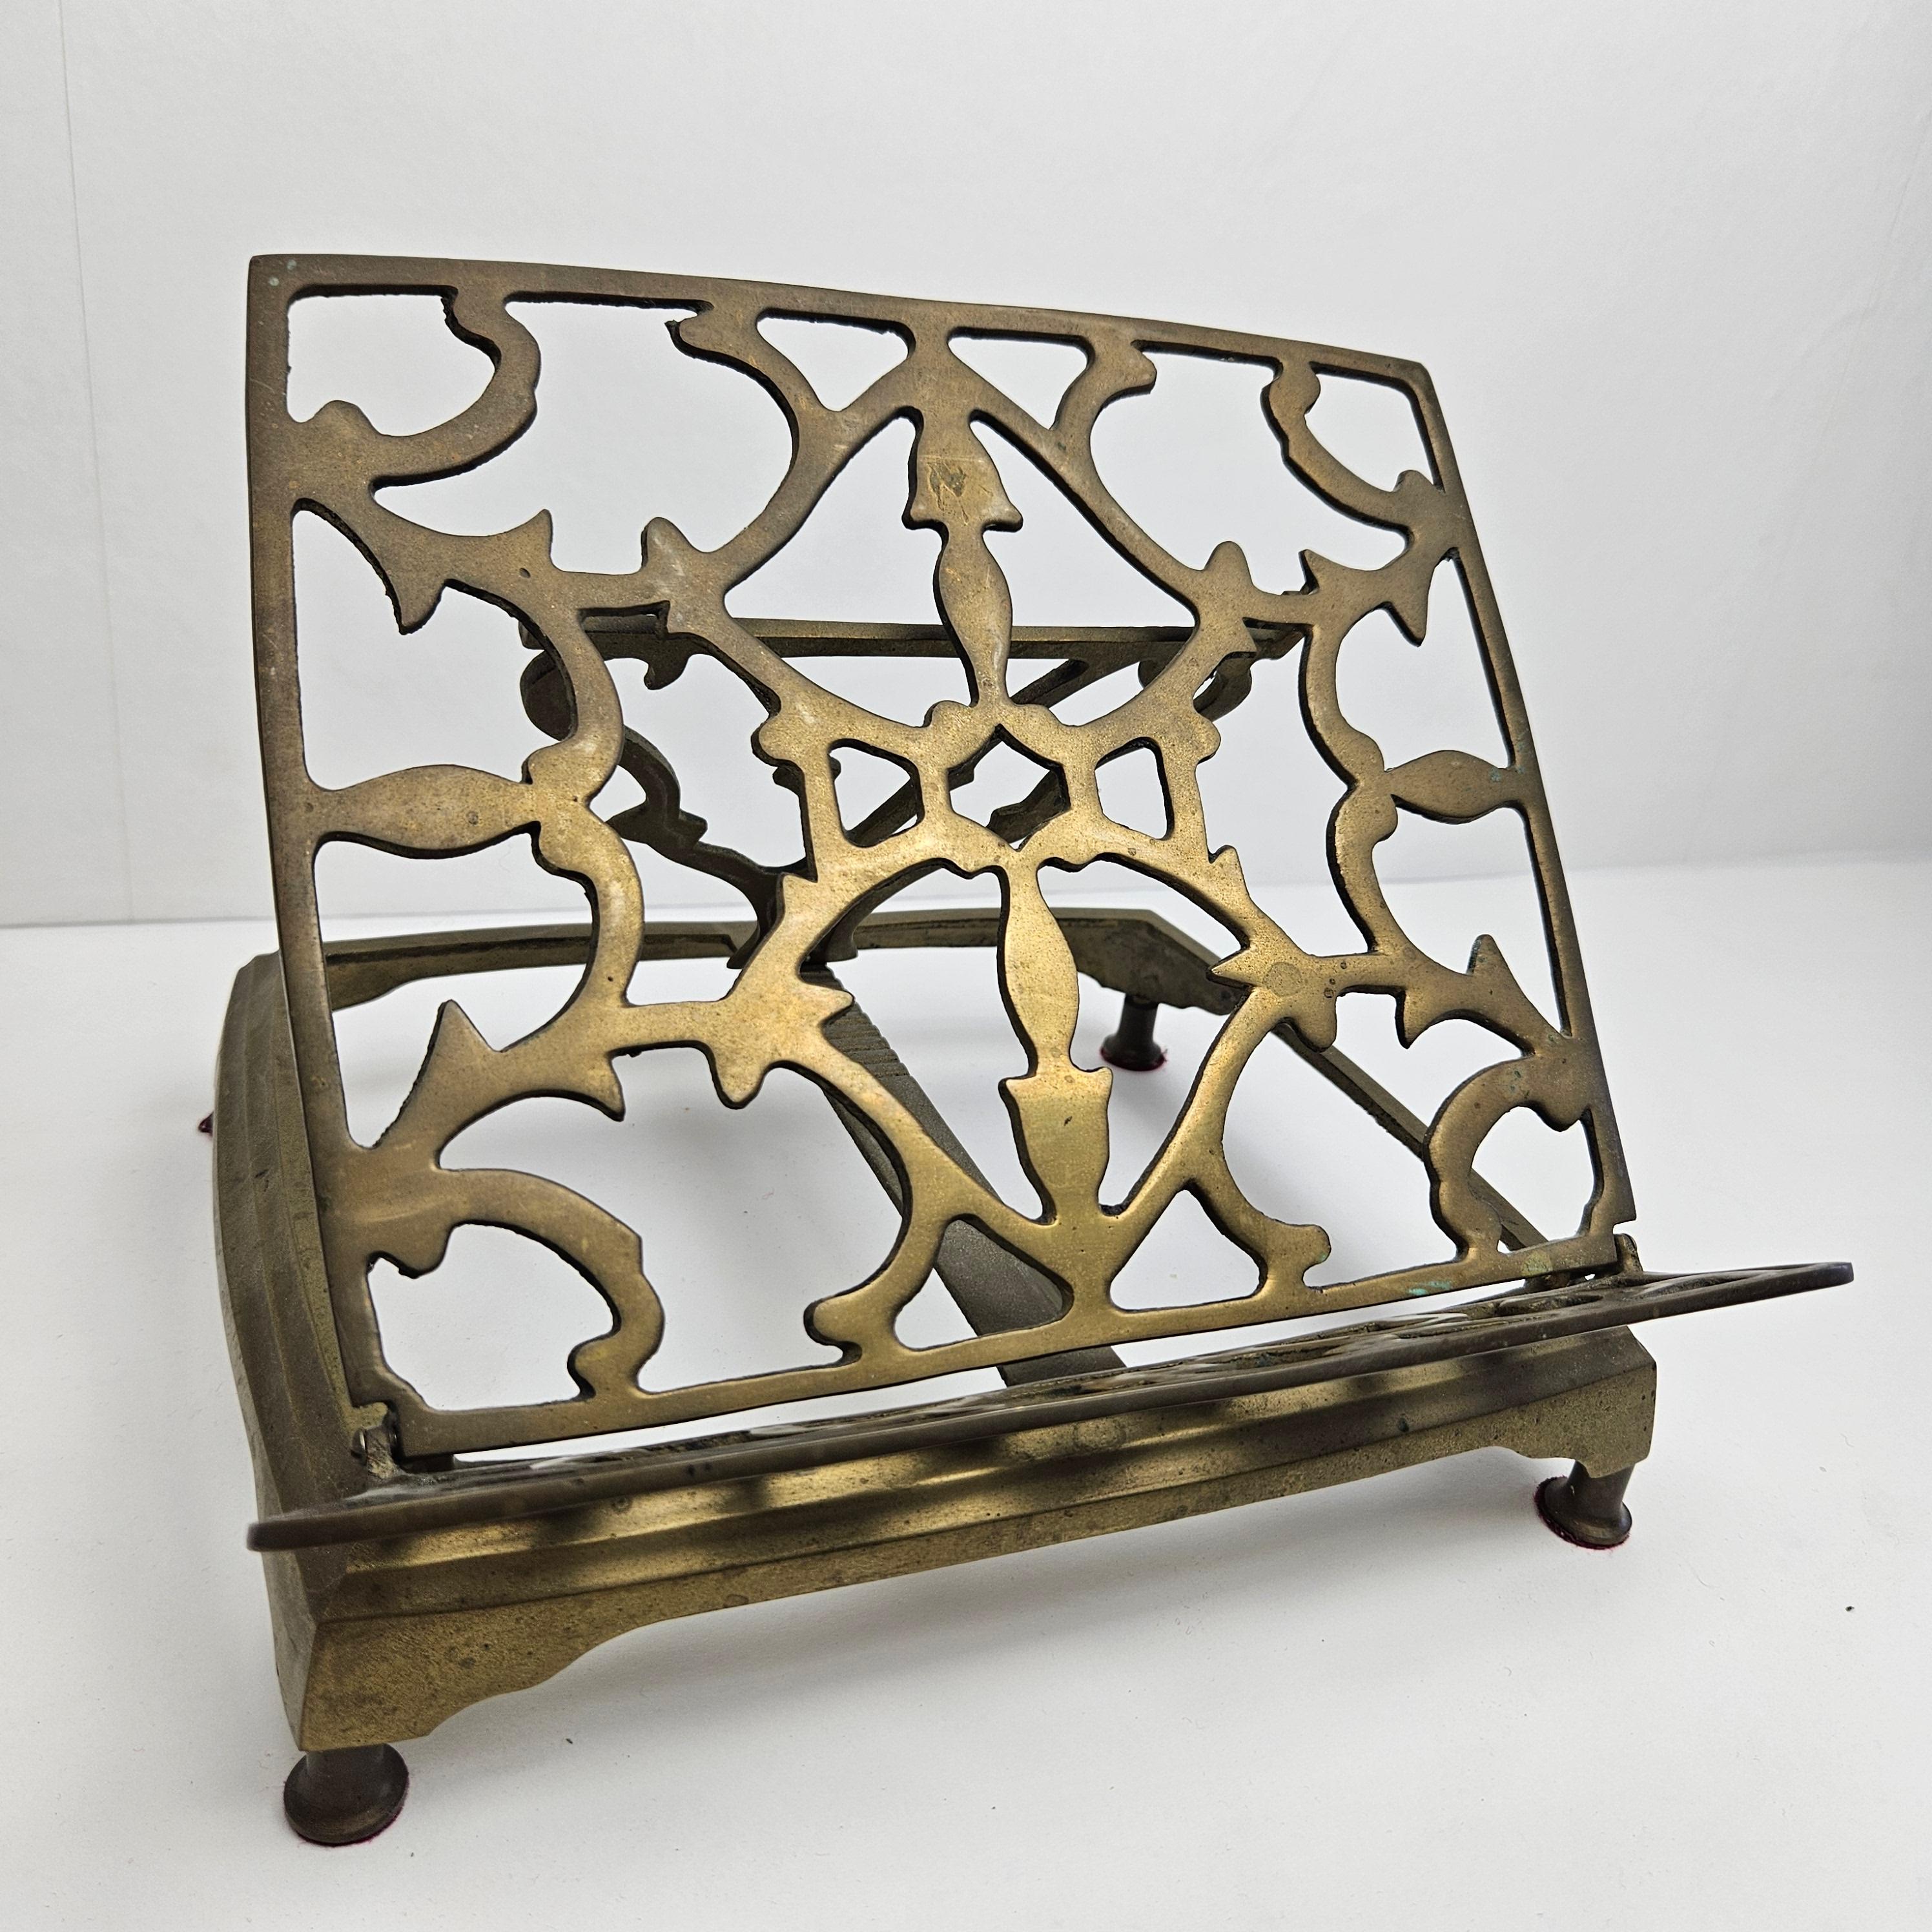 A very beautiful 19th century Porte Livre - Book Stand fabricated in France.

Wonderfully crafted from brass metal. 

Not only perfect for displaying a book or leaflets, but a notebook or small painting as well.